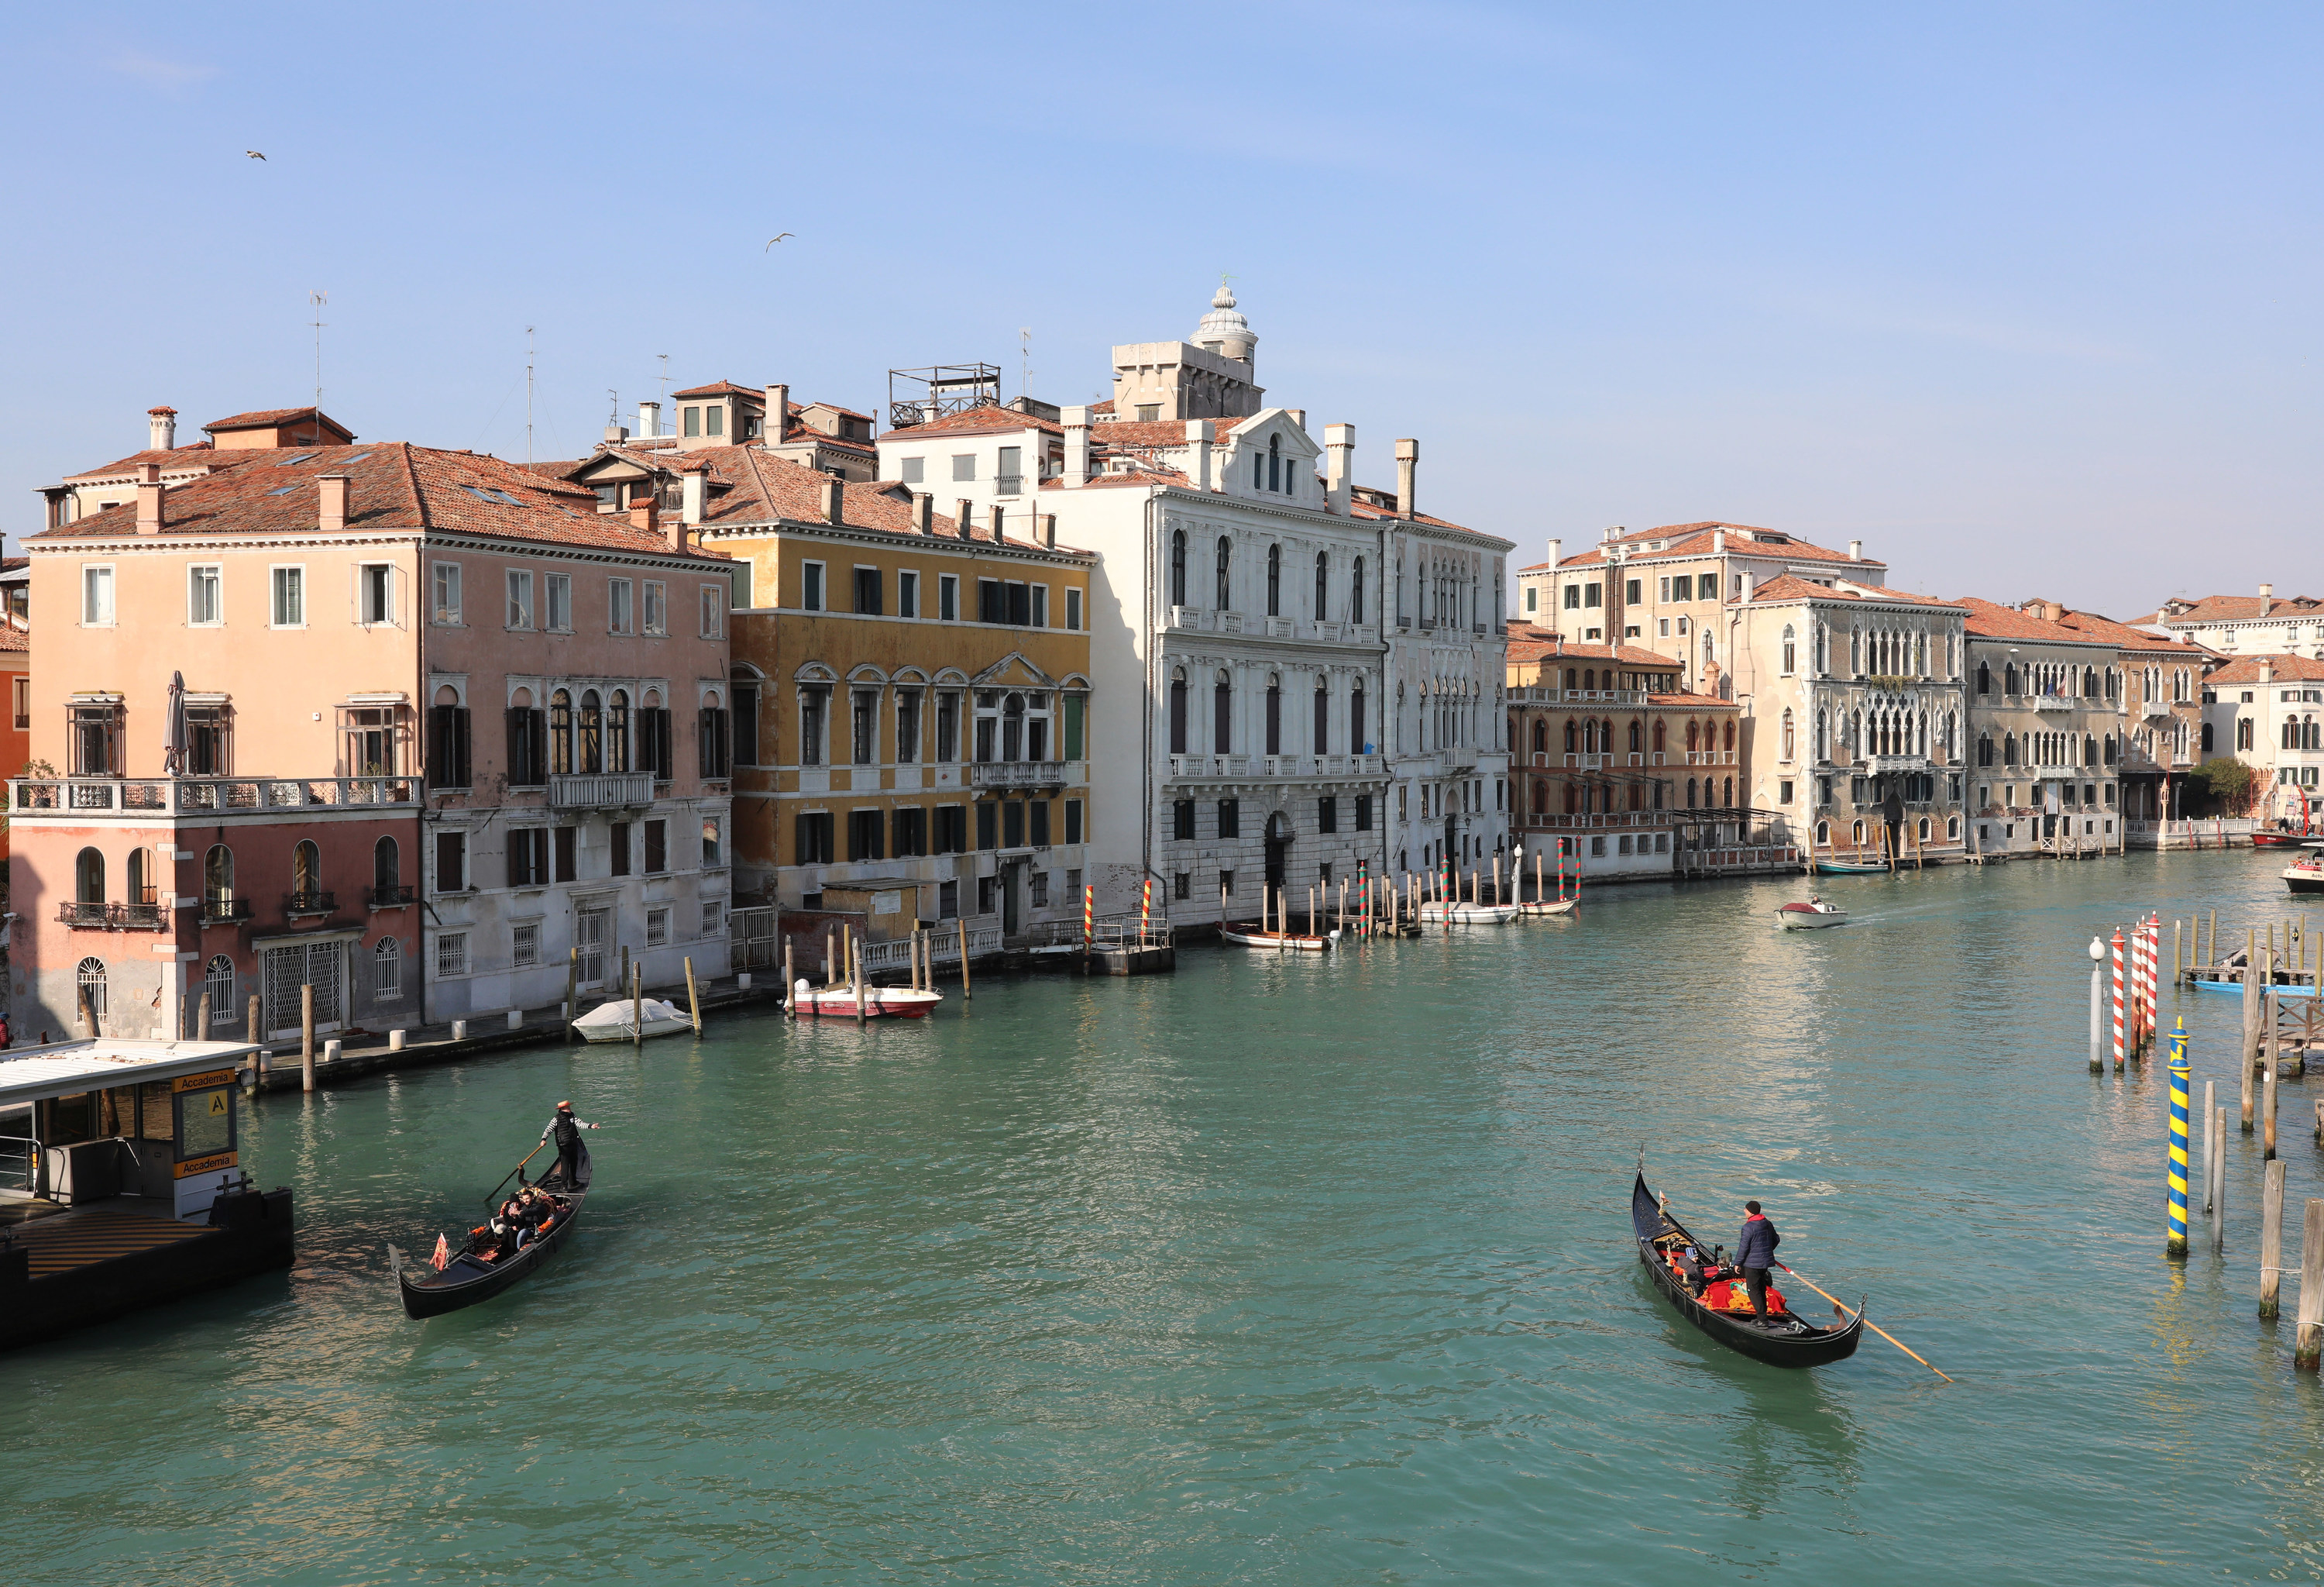 Canal in Venice with gondola boats and buildings on the water.